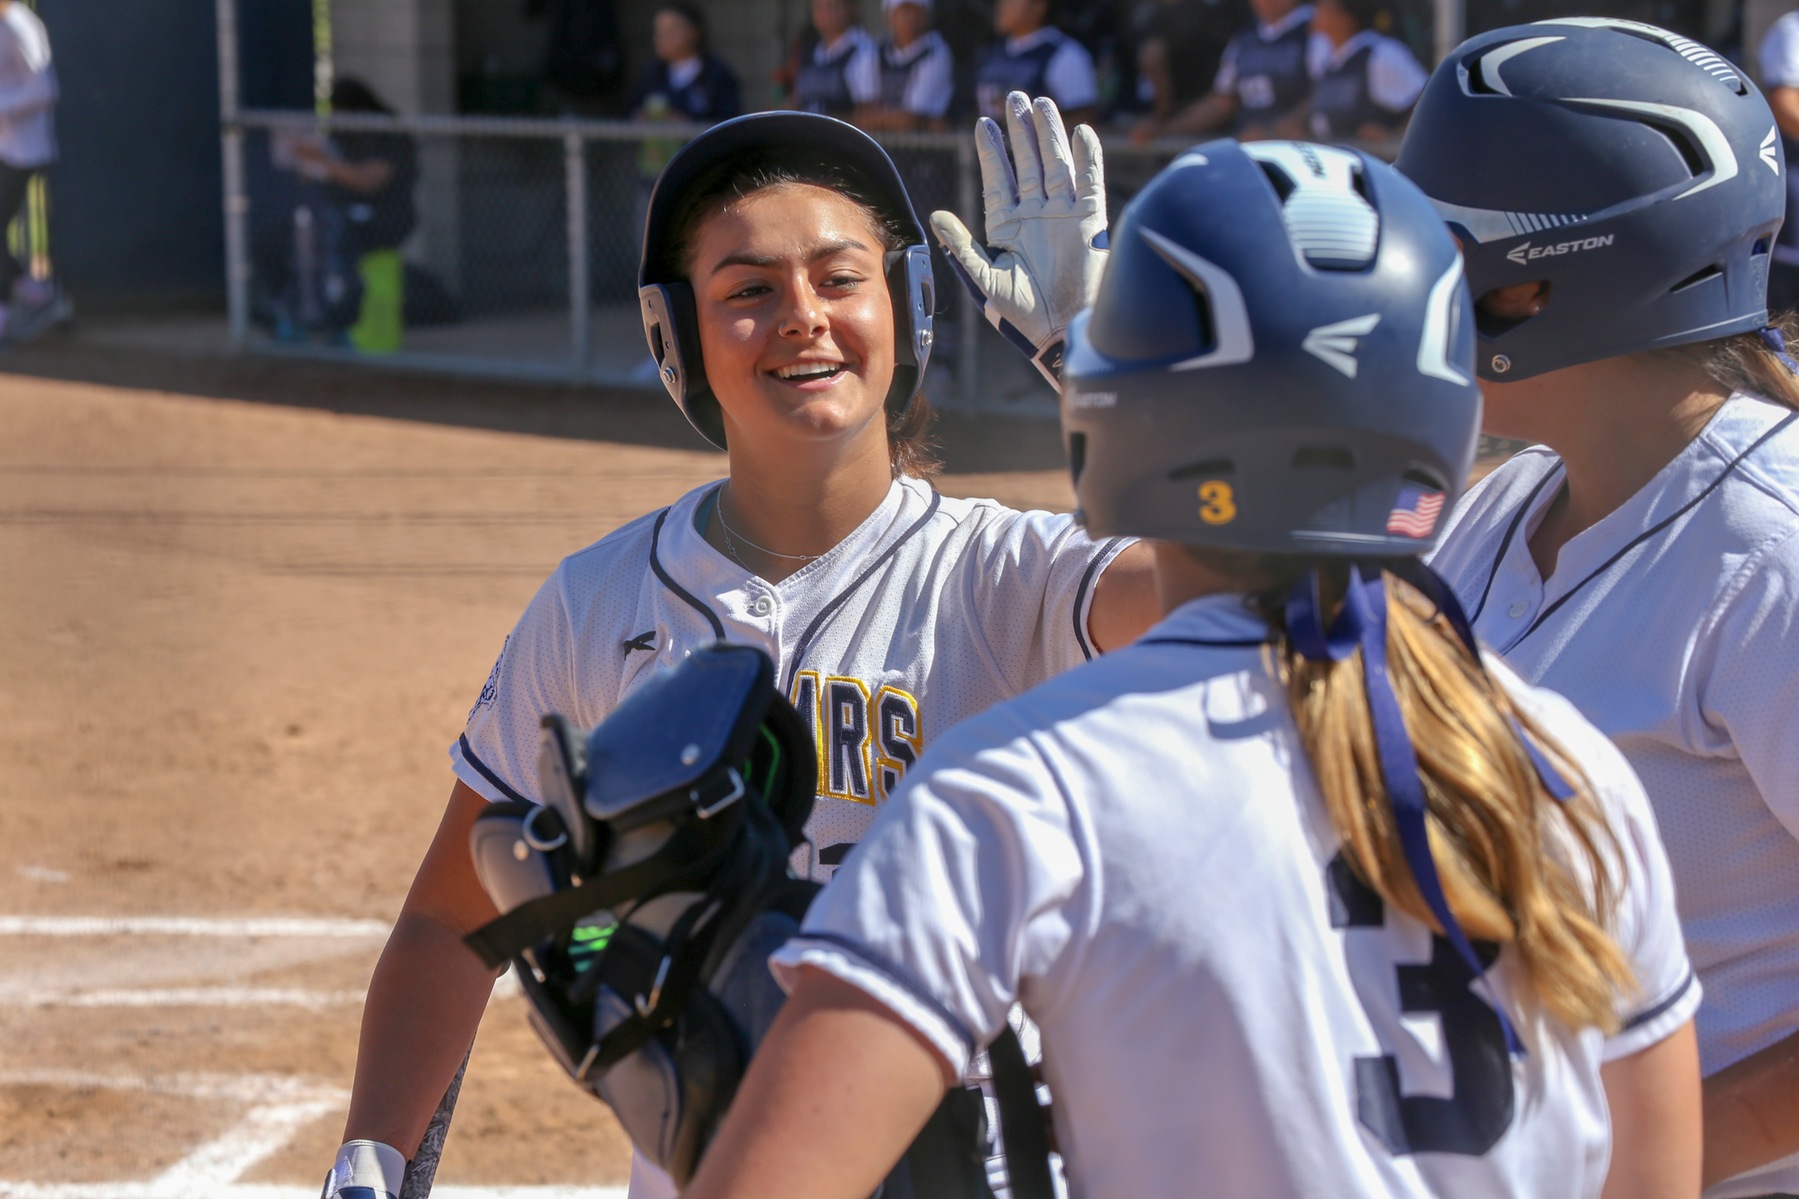 COC softball player Camryn Webb high fives a teammates during game on March 12, 2019.